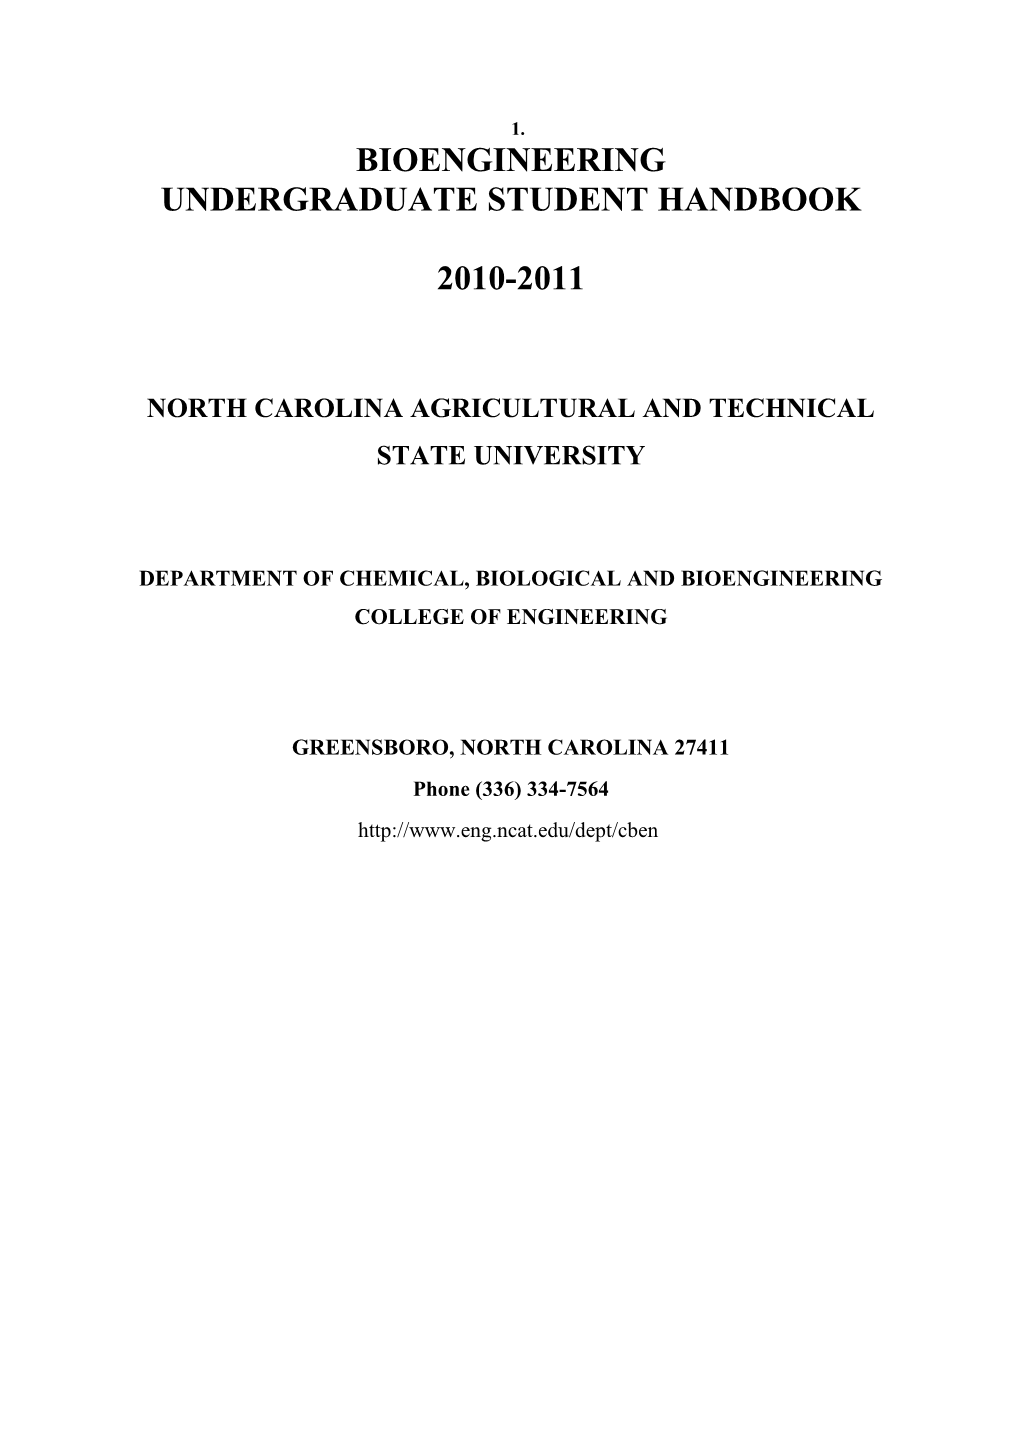 North Carolina Agricultural and Technical